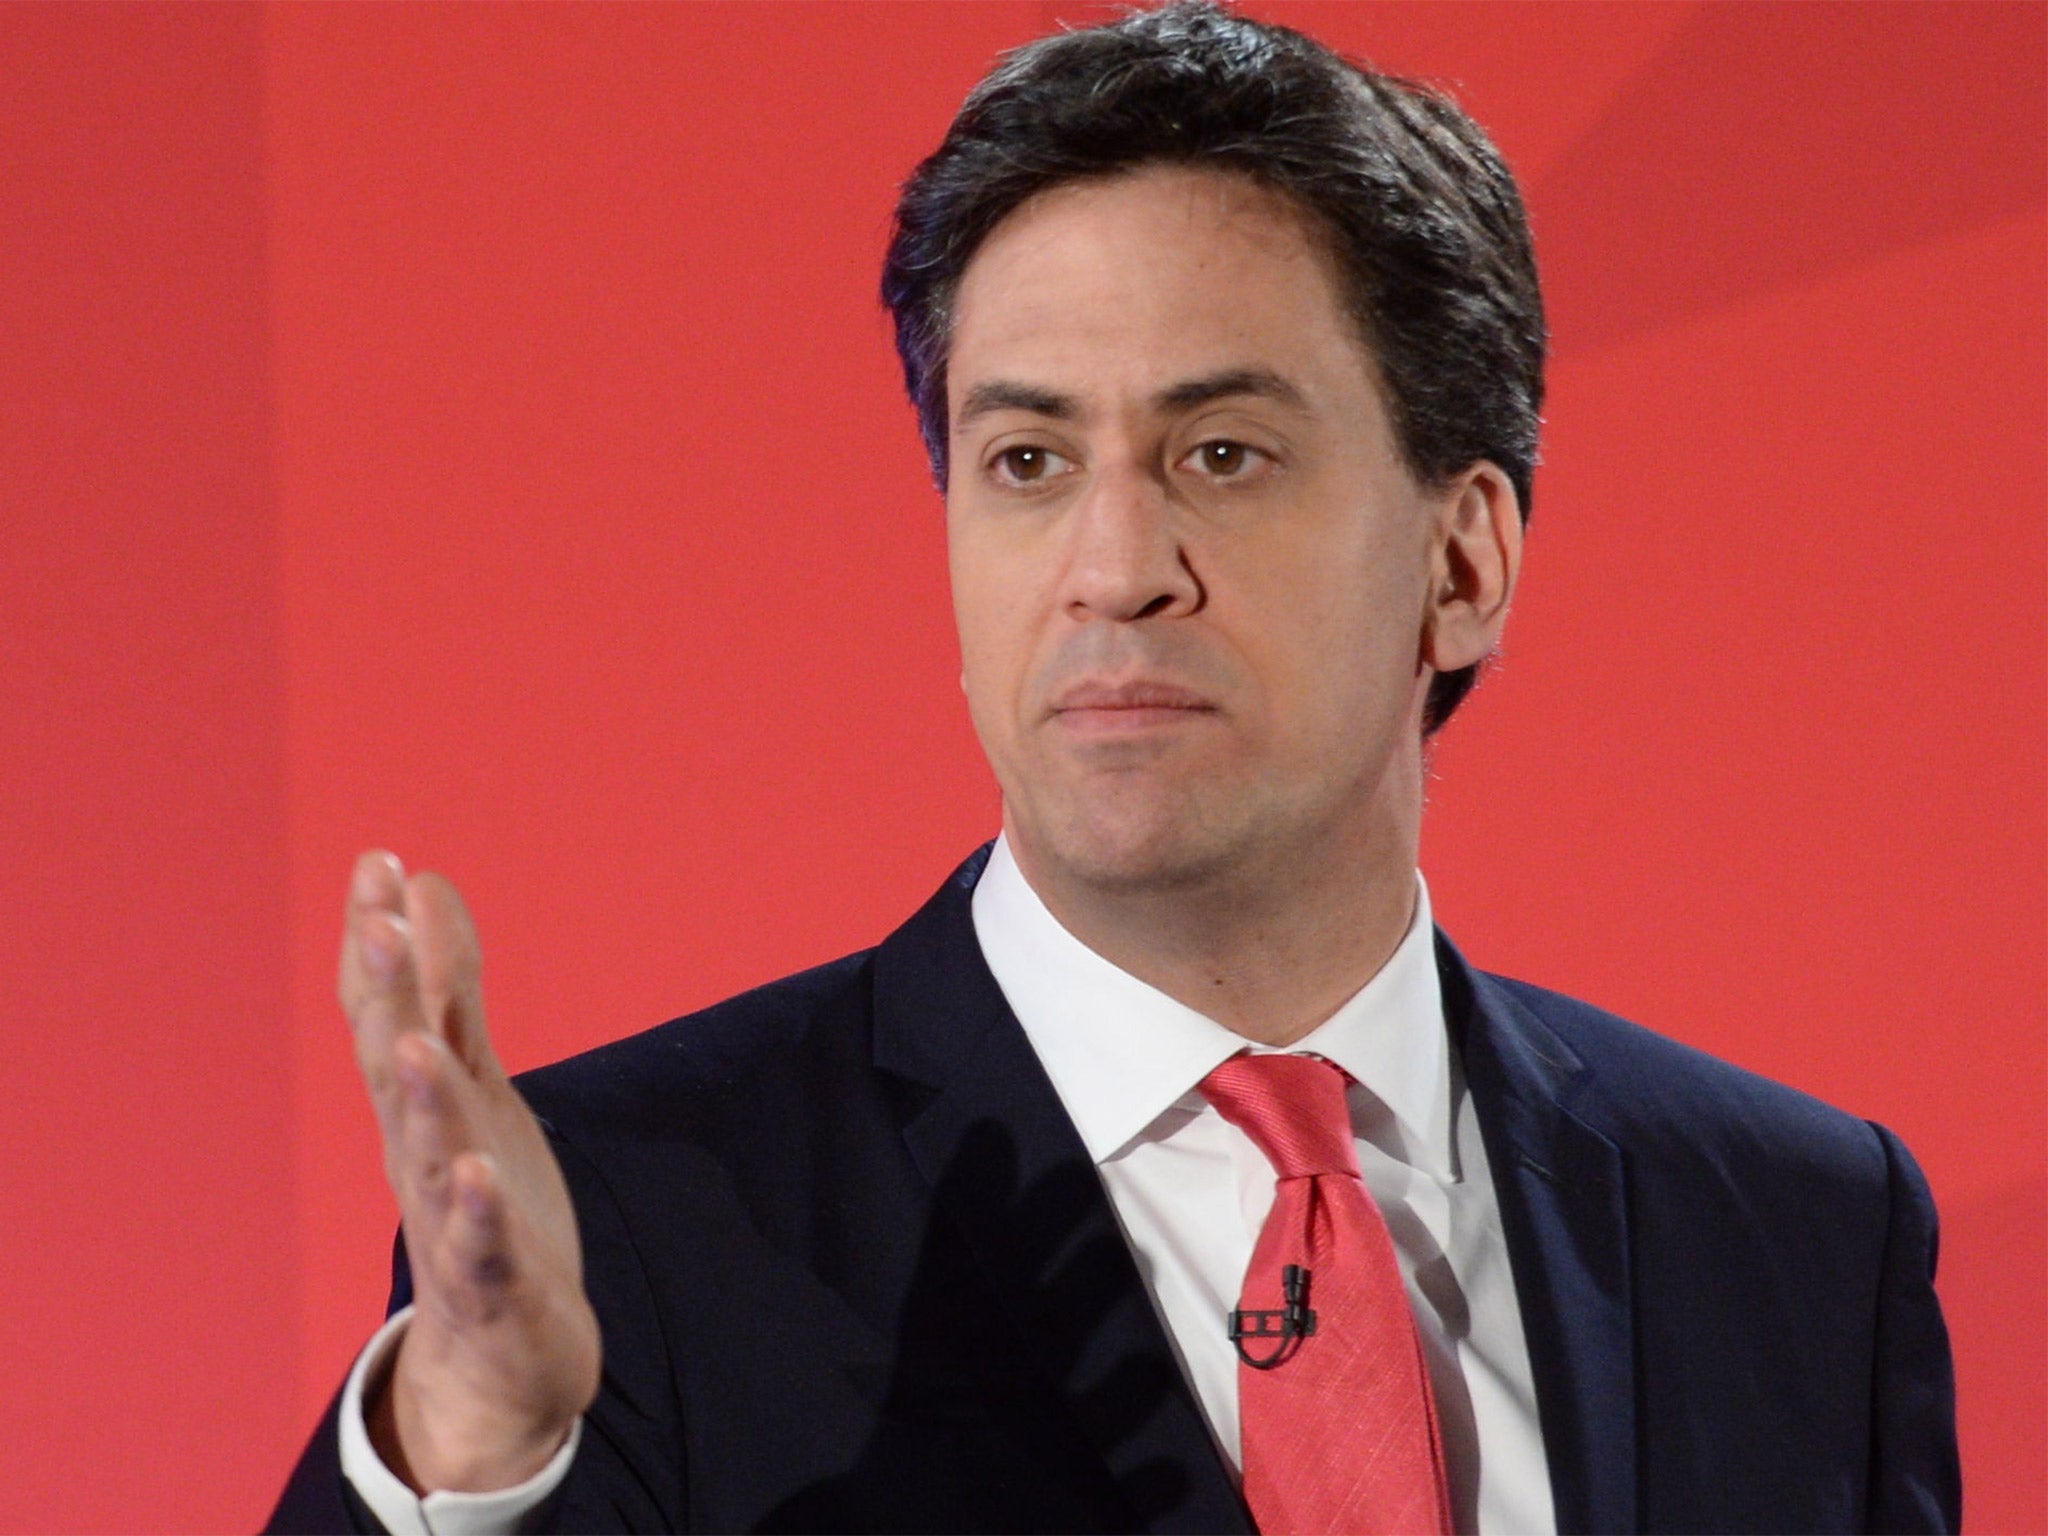 The Labour leader will denounce the Tory campaign for dishonesty and recklessness